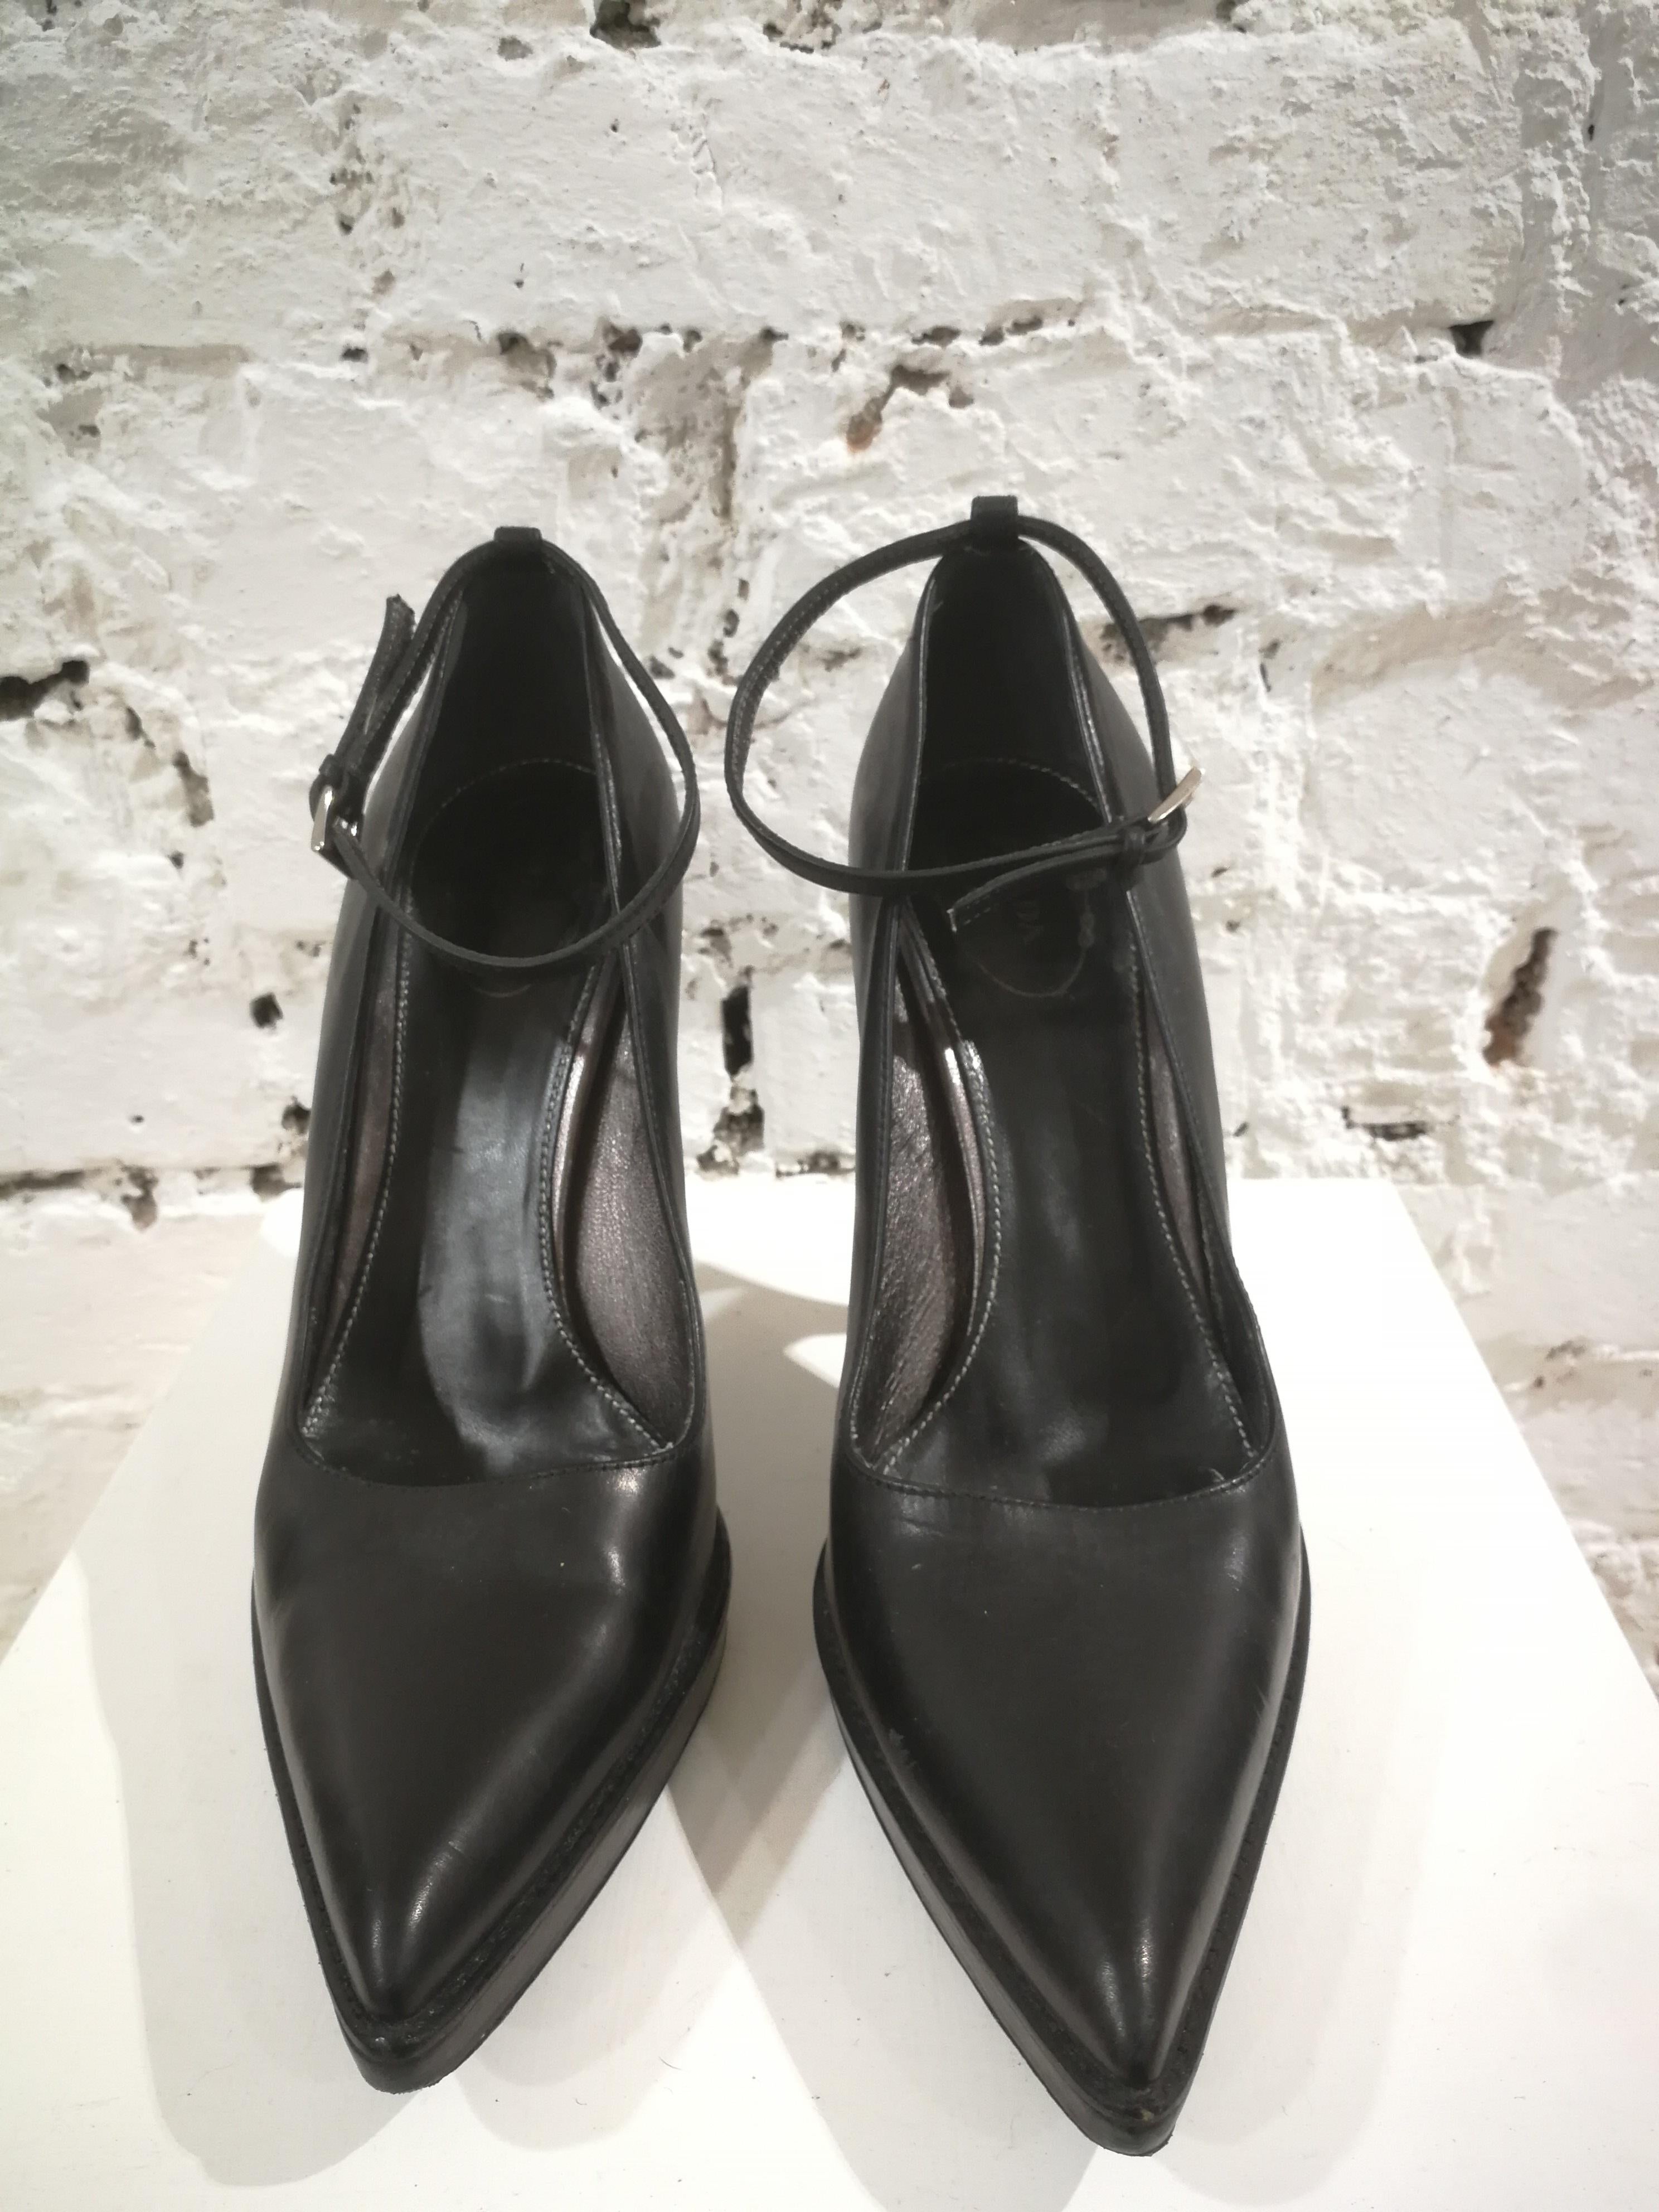 Prada Black Leather Decollete
totally made in italy in size 40
heel 11 cm